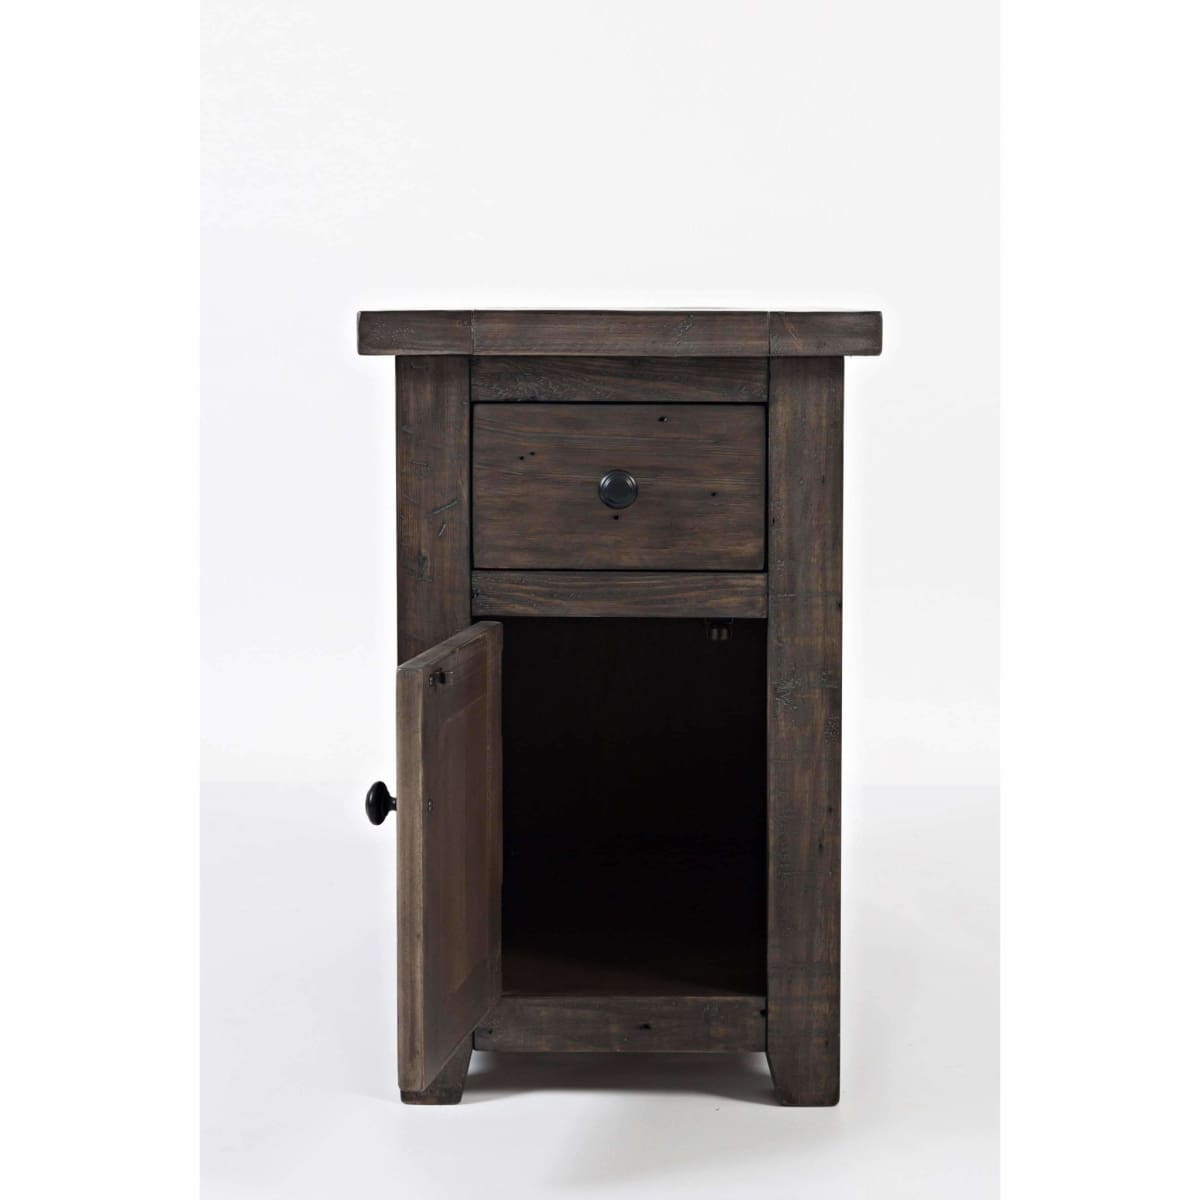 Madison County Chairside Table - END TABLE/SIDE TABLE